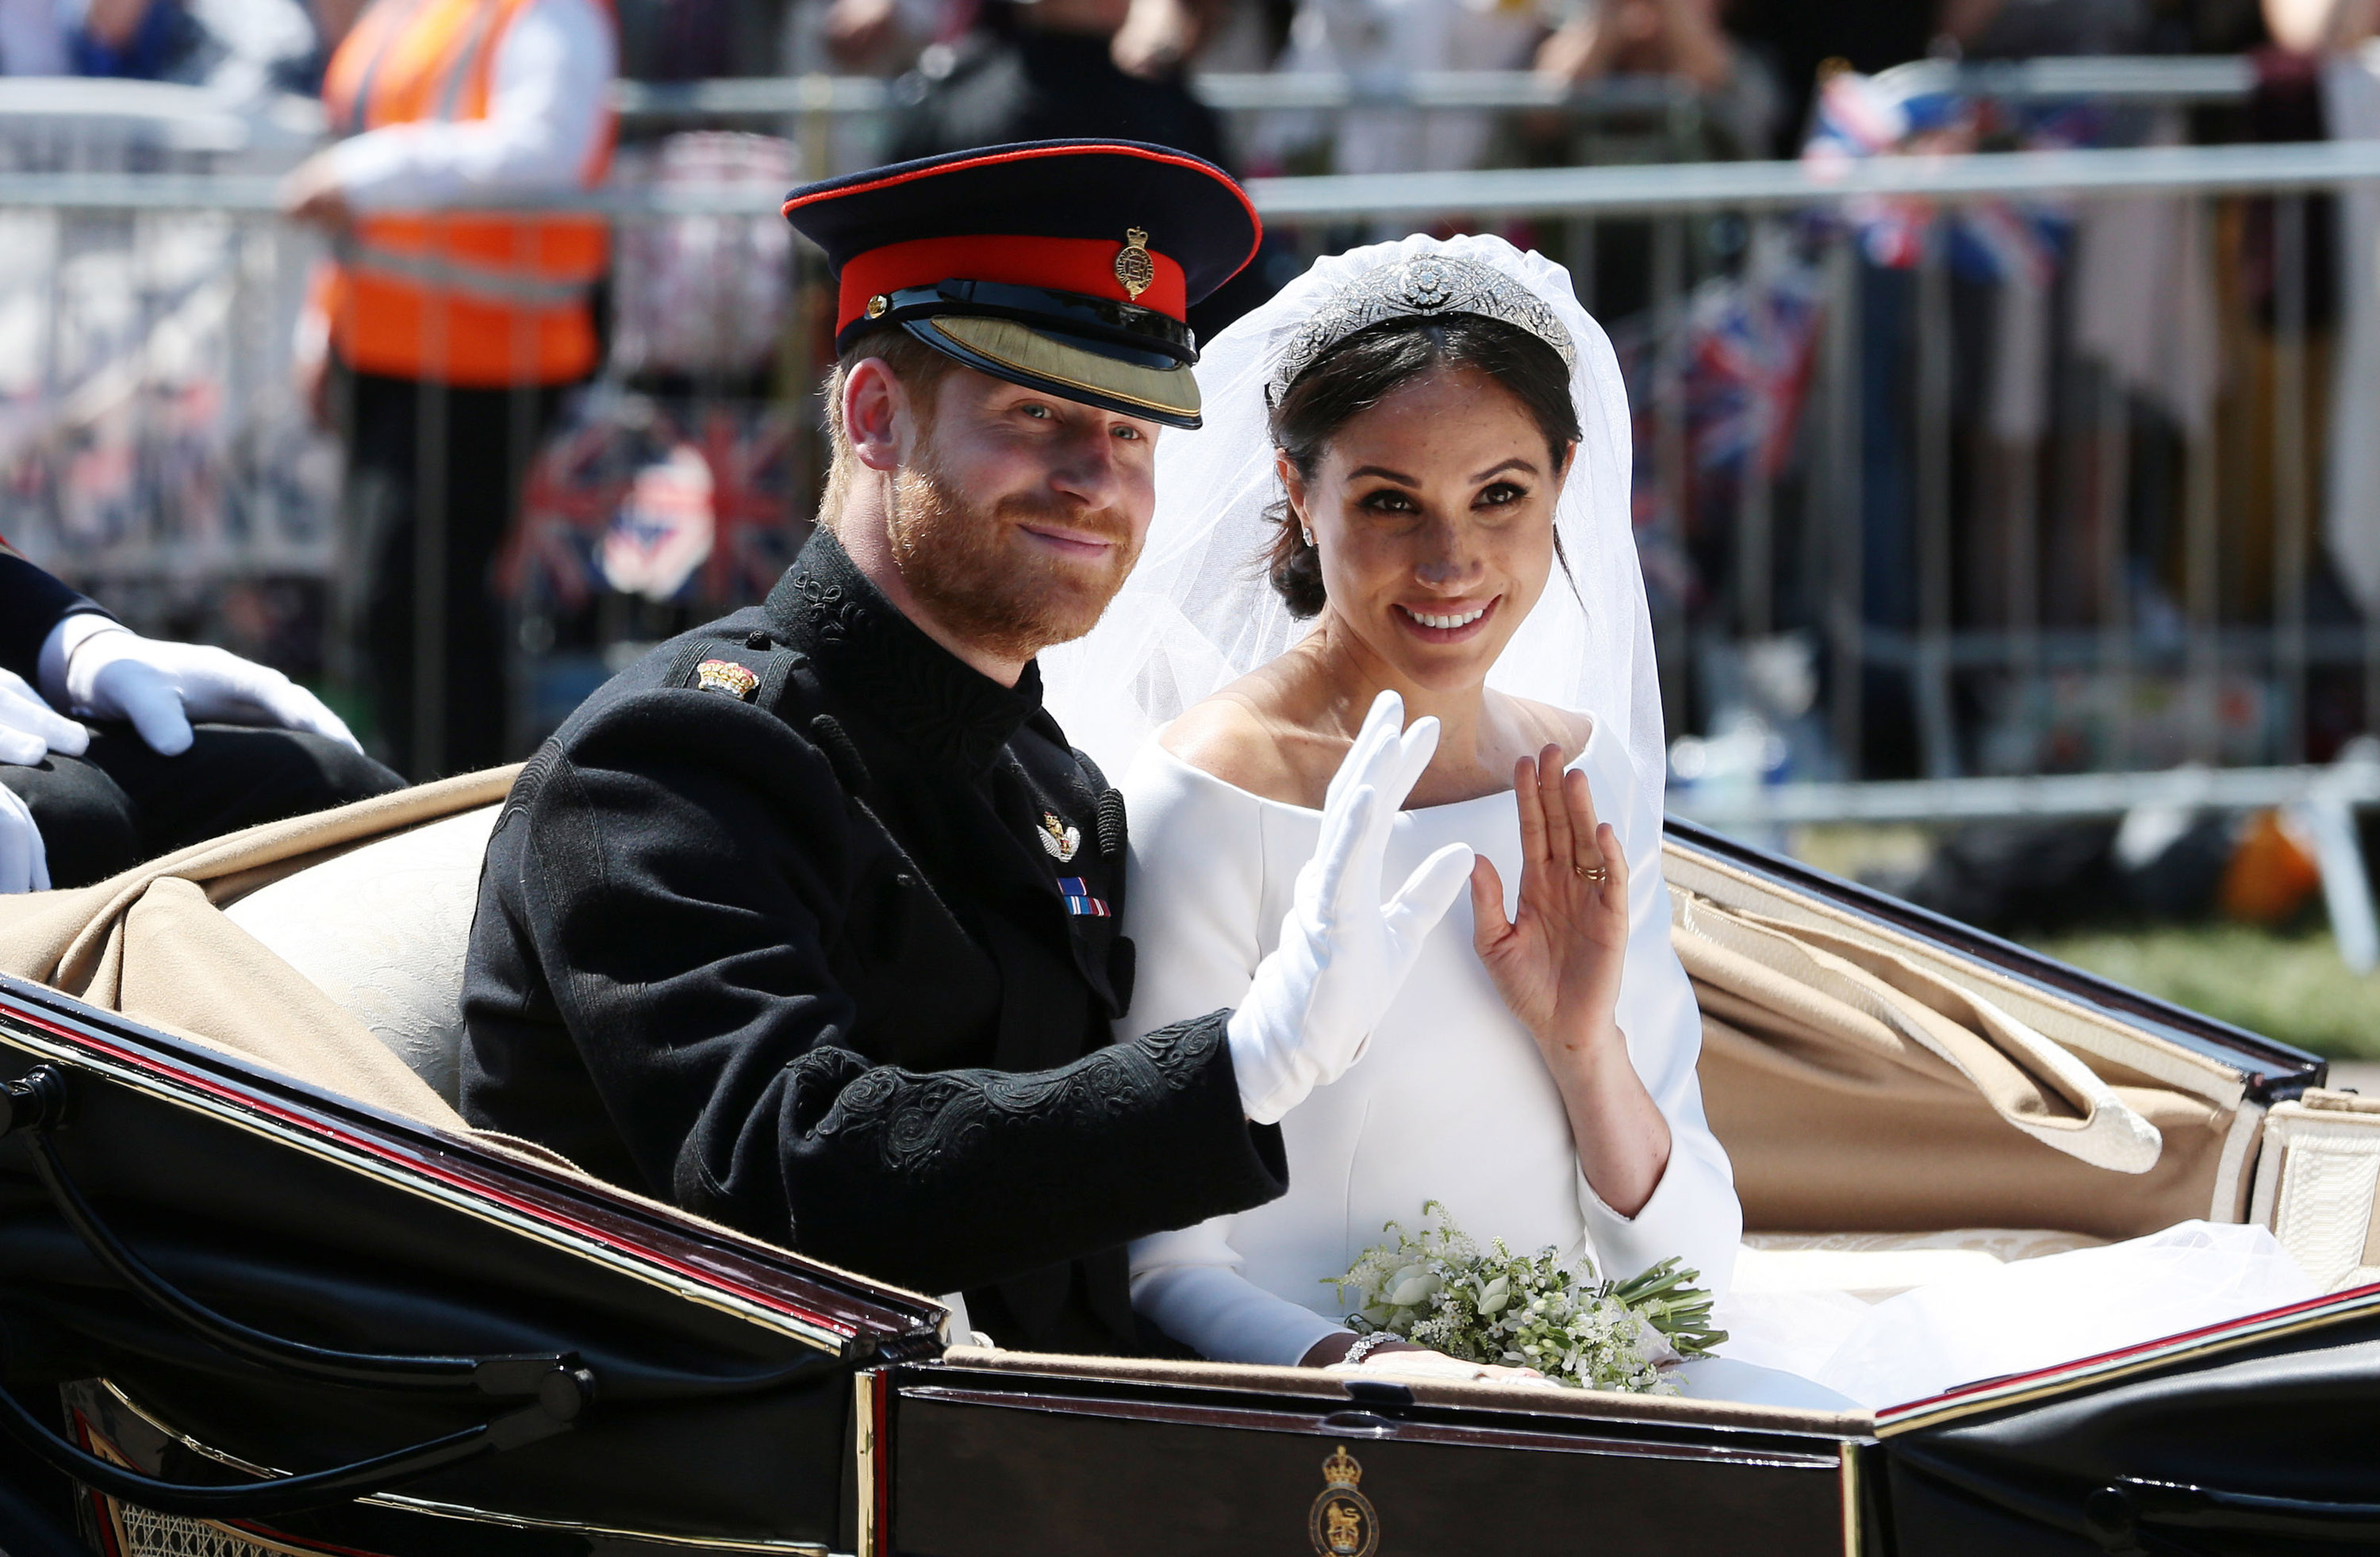 Prince Harry, who reportedly thought the best way to get Meghan Markle protection was through marriage, waves to the crowd with his wife during the carriage procession following their wedding